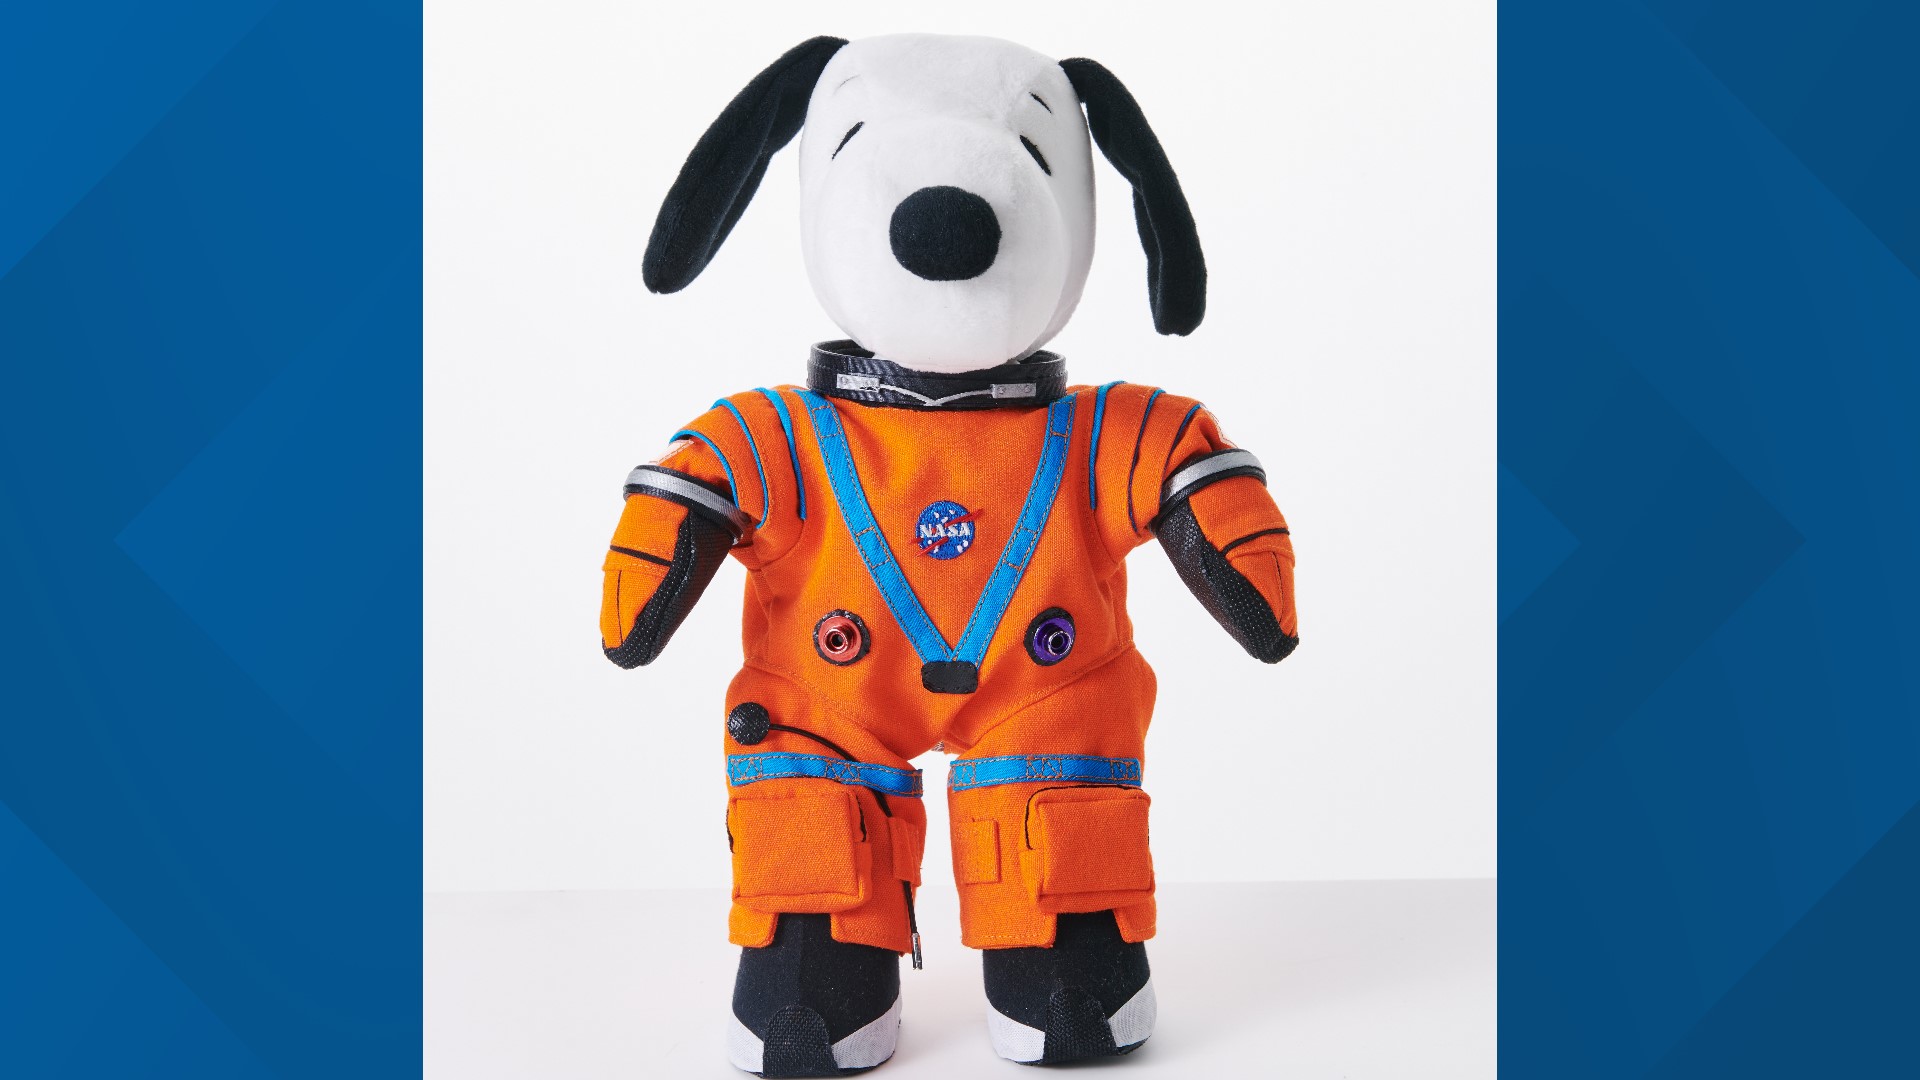 As a tribute to the Apollo 10 astronauts, who used the peanuts cartoon to make nicknames for their equipment, Snoopy became a passenger on the NASA moon launch.